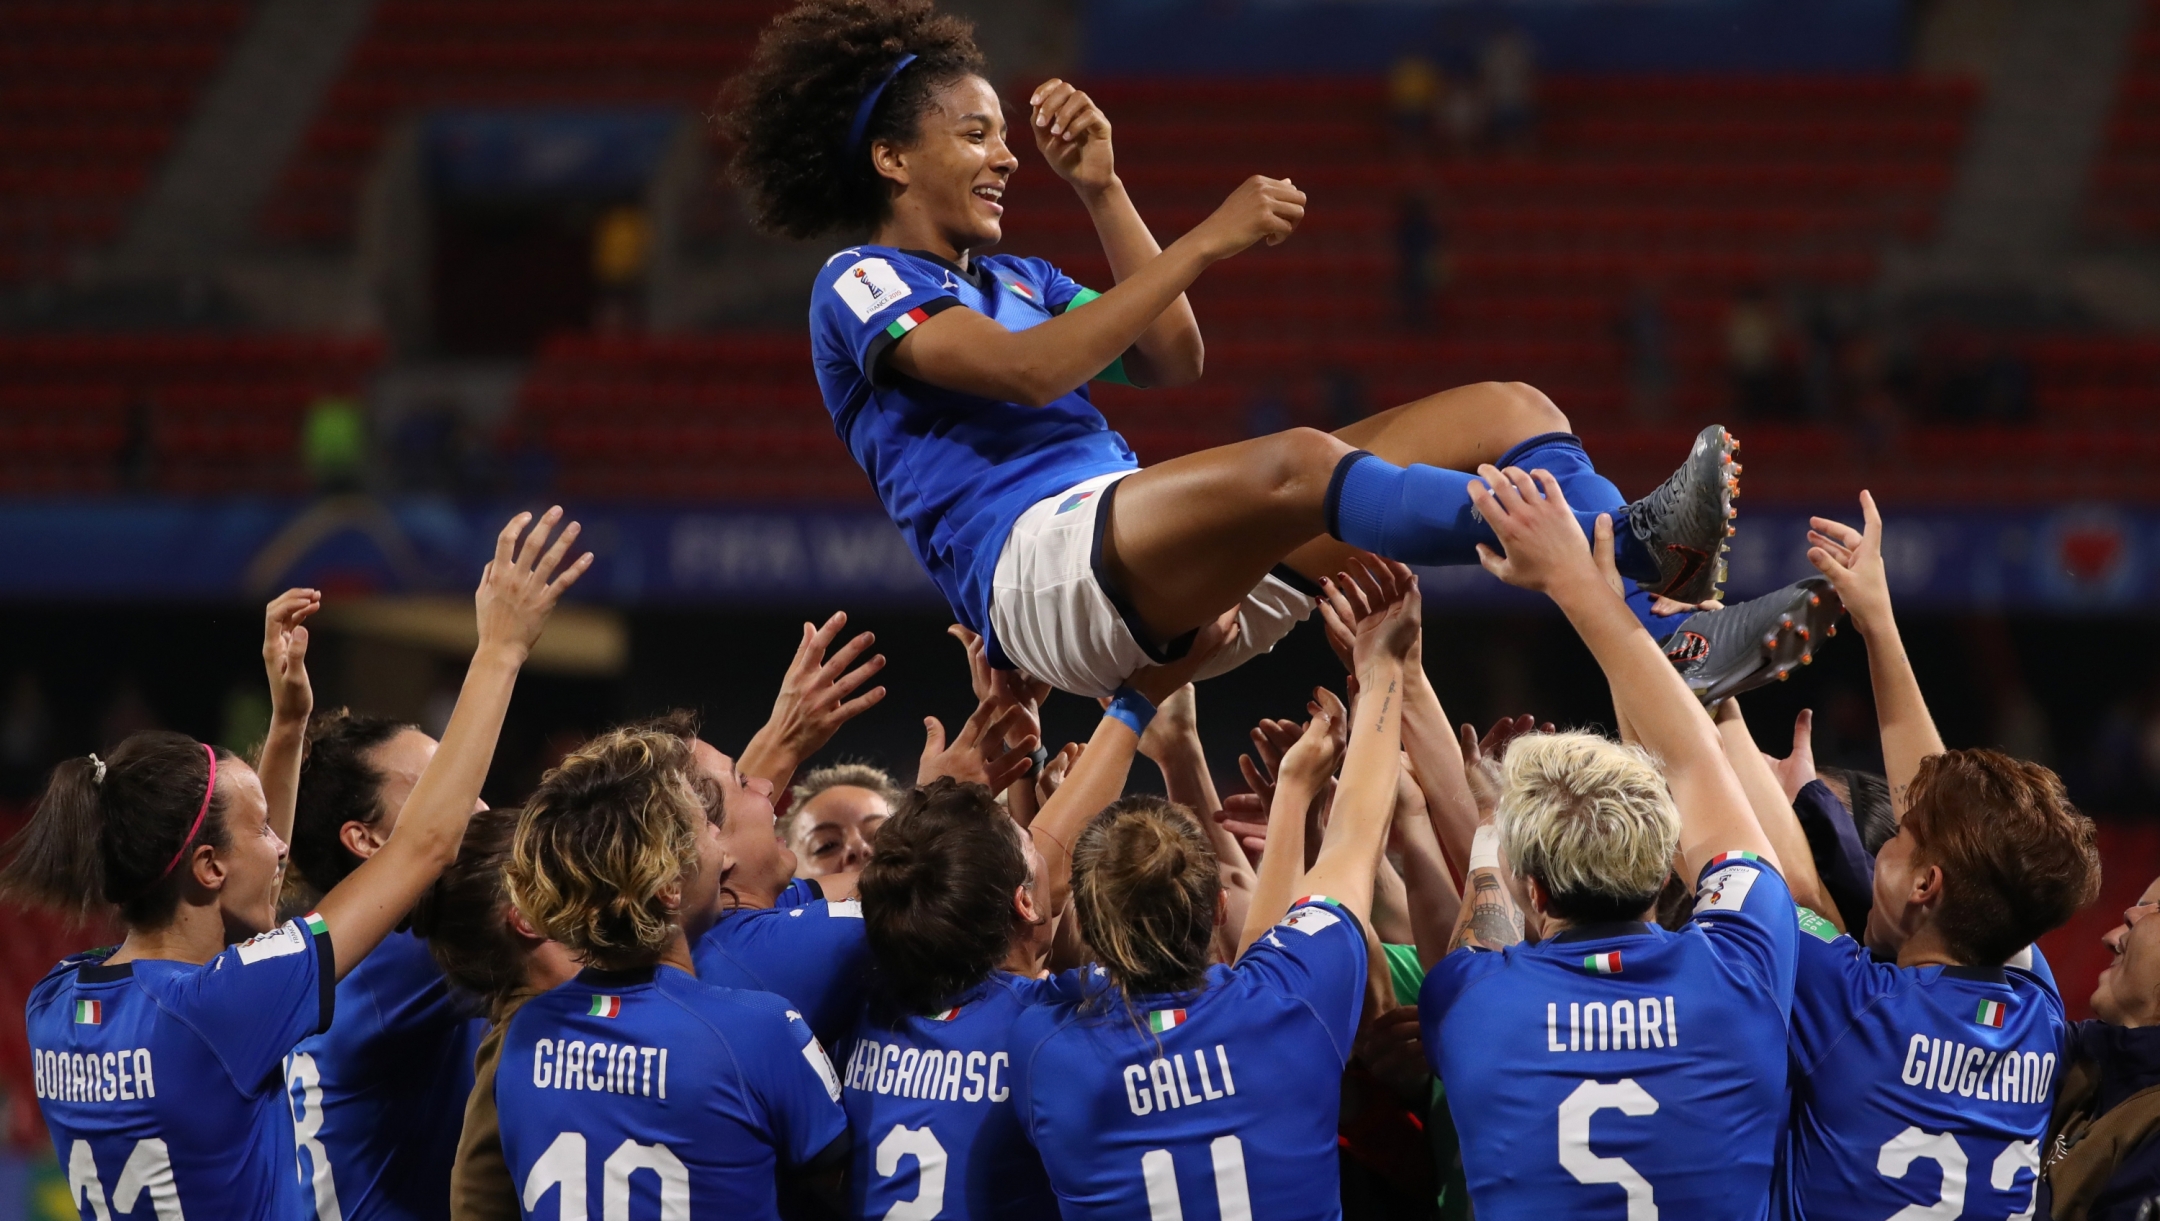 VALENCIENNES, FRANCE - JUNE 18: Sara Gama of Italy is thrown in the air by her teammates following the 2019 FIFA Women's World Cup France group C match between Italy and Brazil at Stade du Hainaut on June 18, 2019 in Valenciennes, France. (Photo by Robert Cianflone/Getty Images)